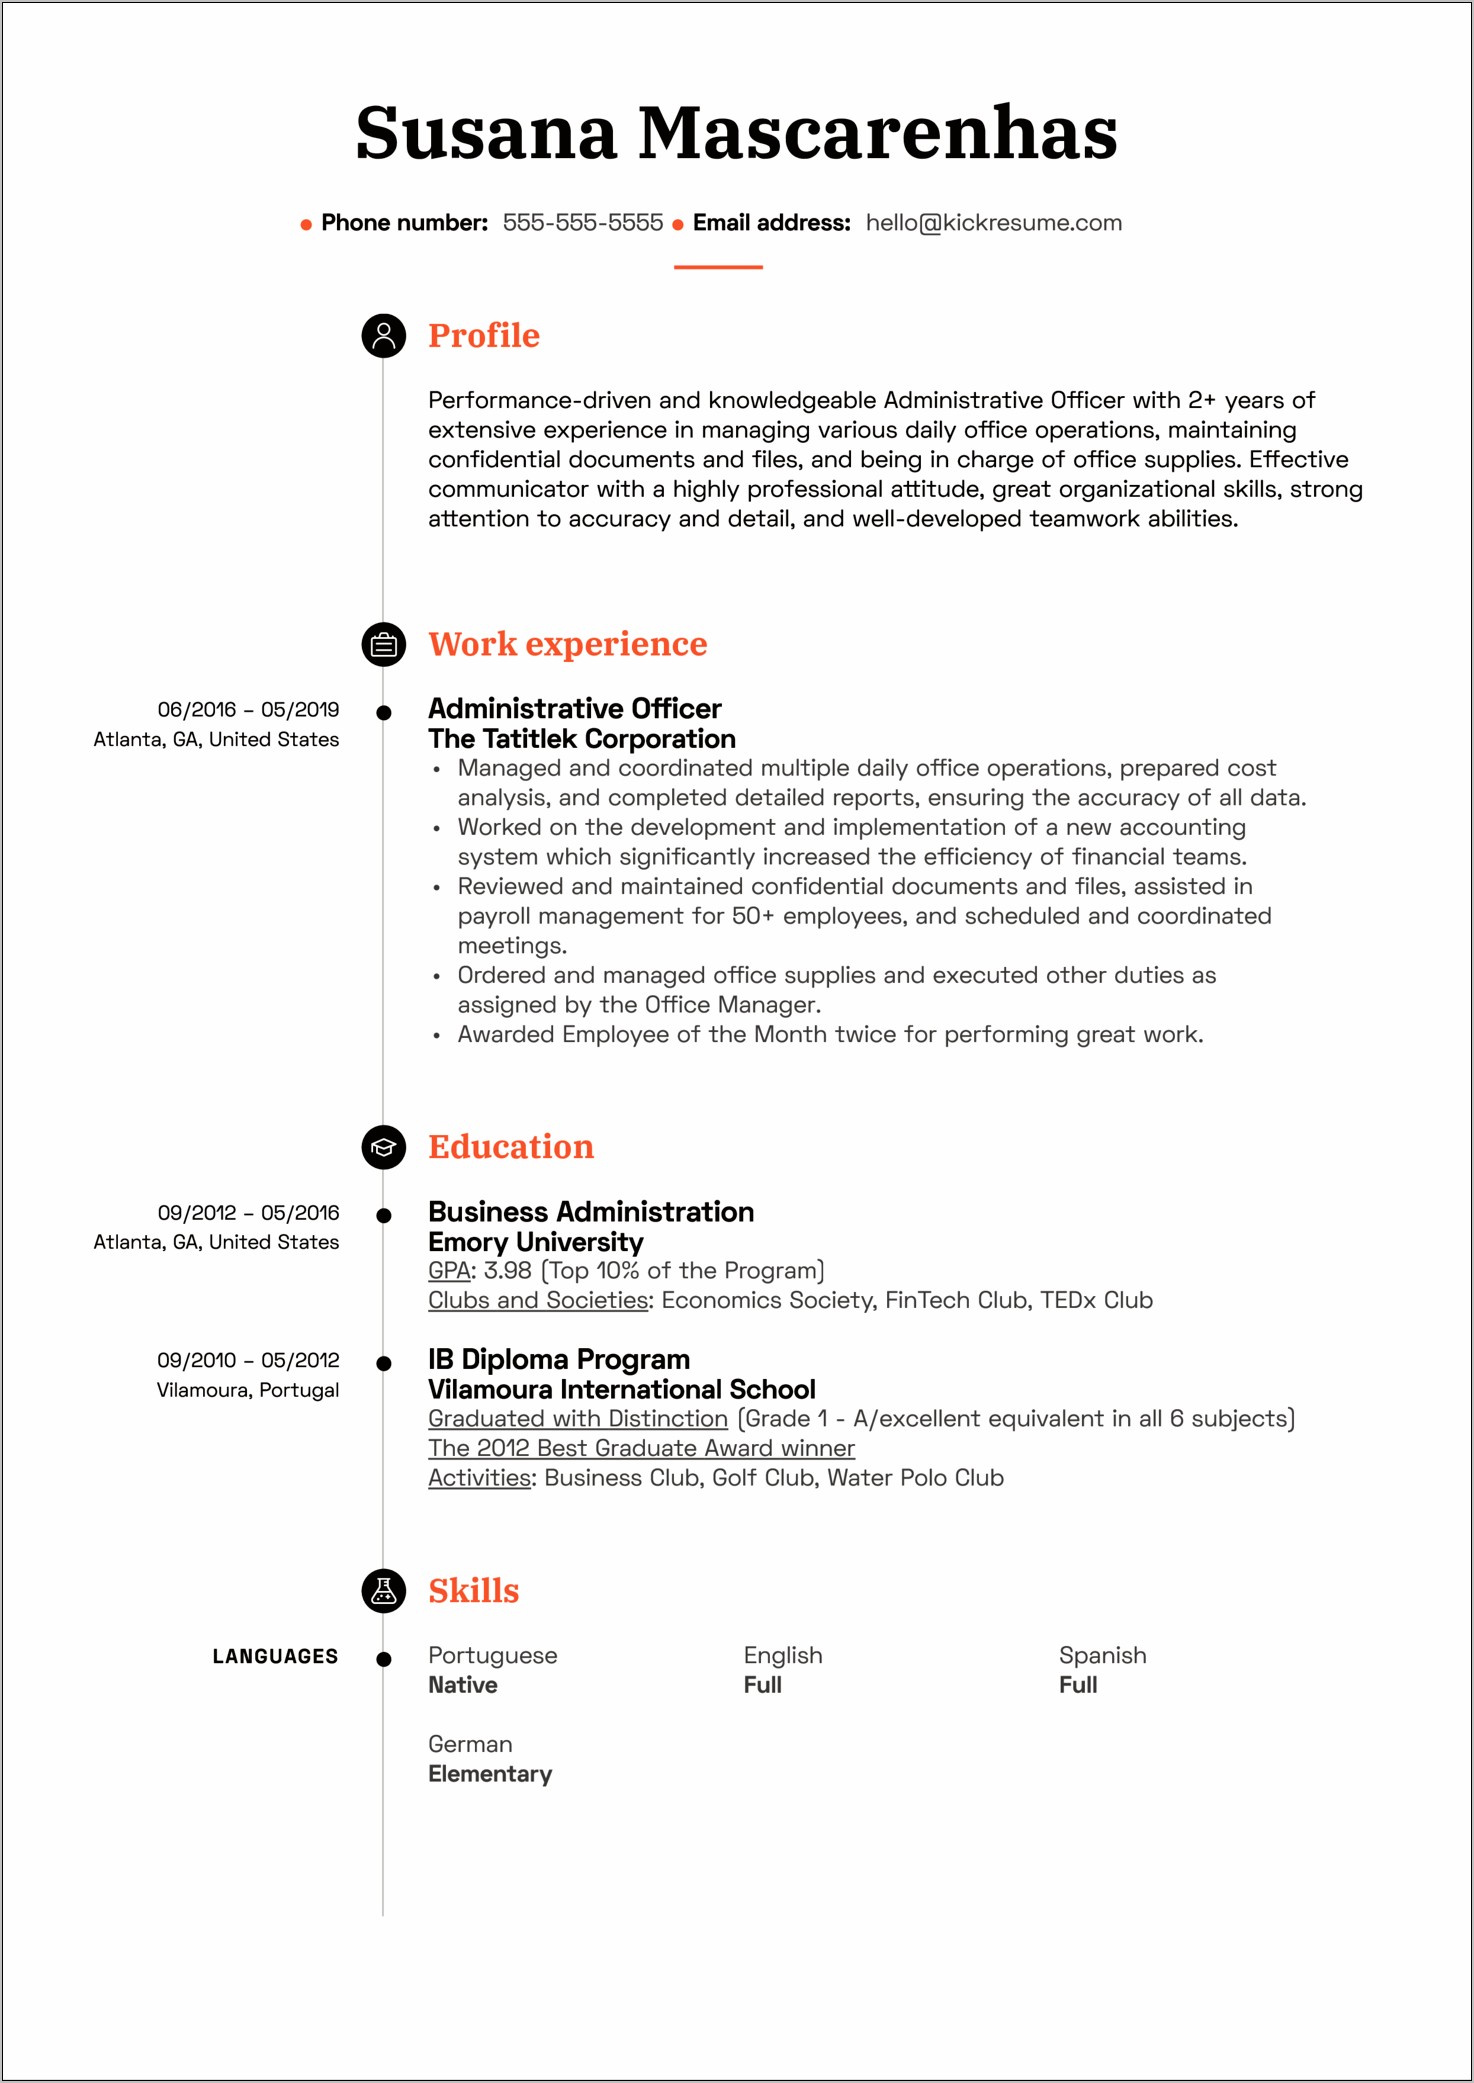 Popular Skills And Qualifications On A Resume